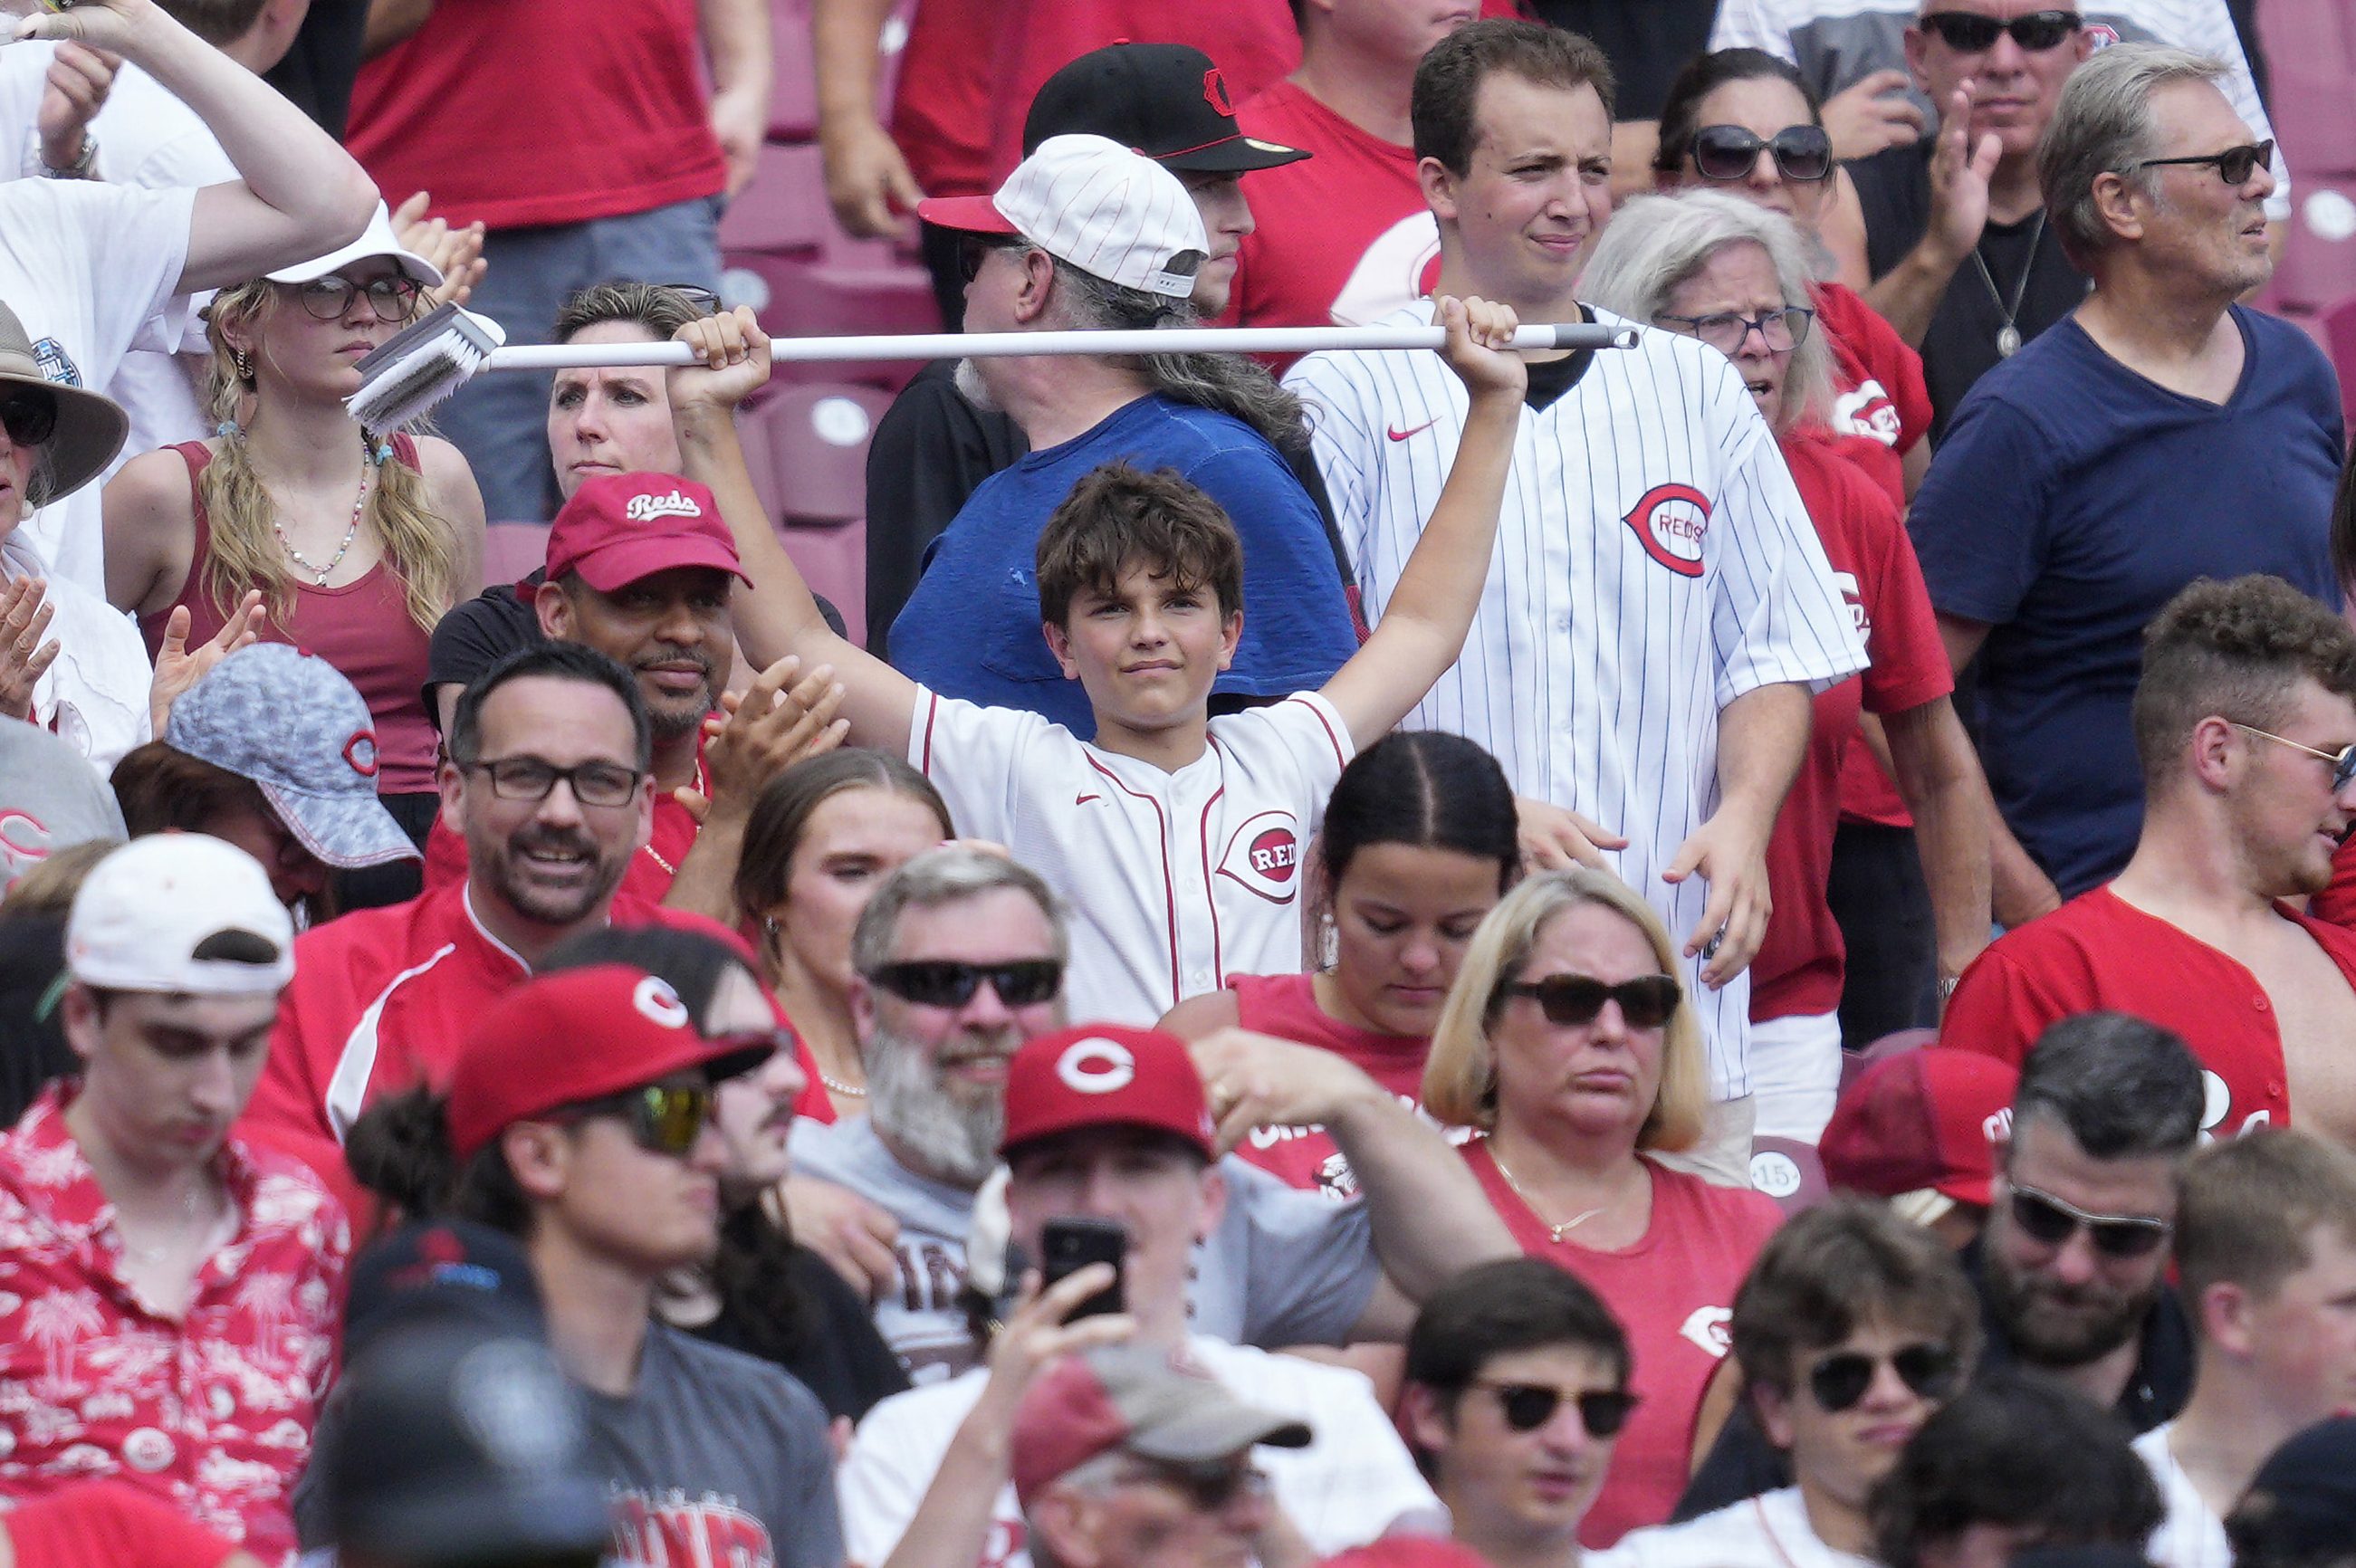 MLB eyeing a fresh look with its younger fans this season